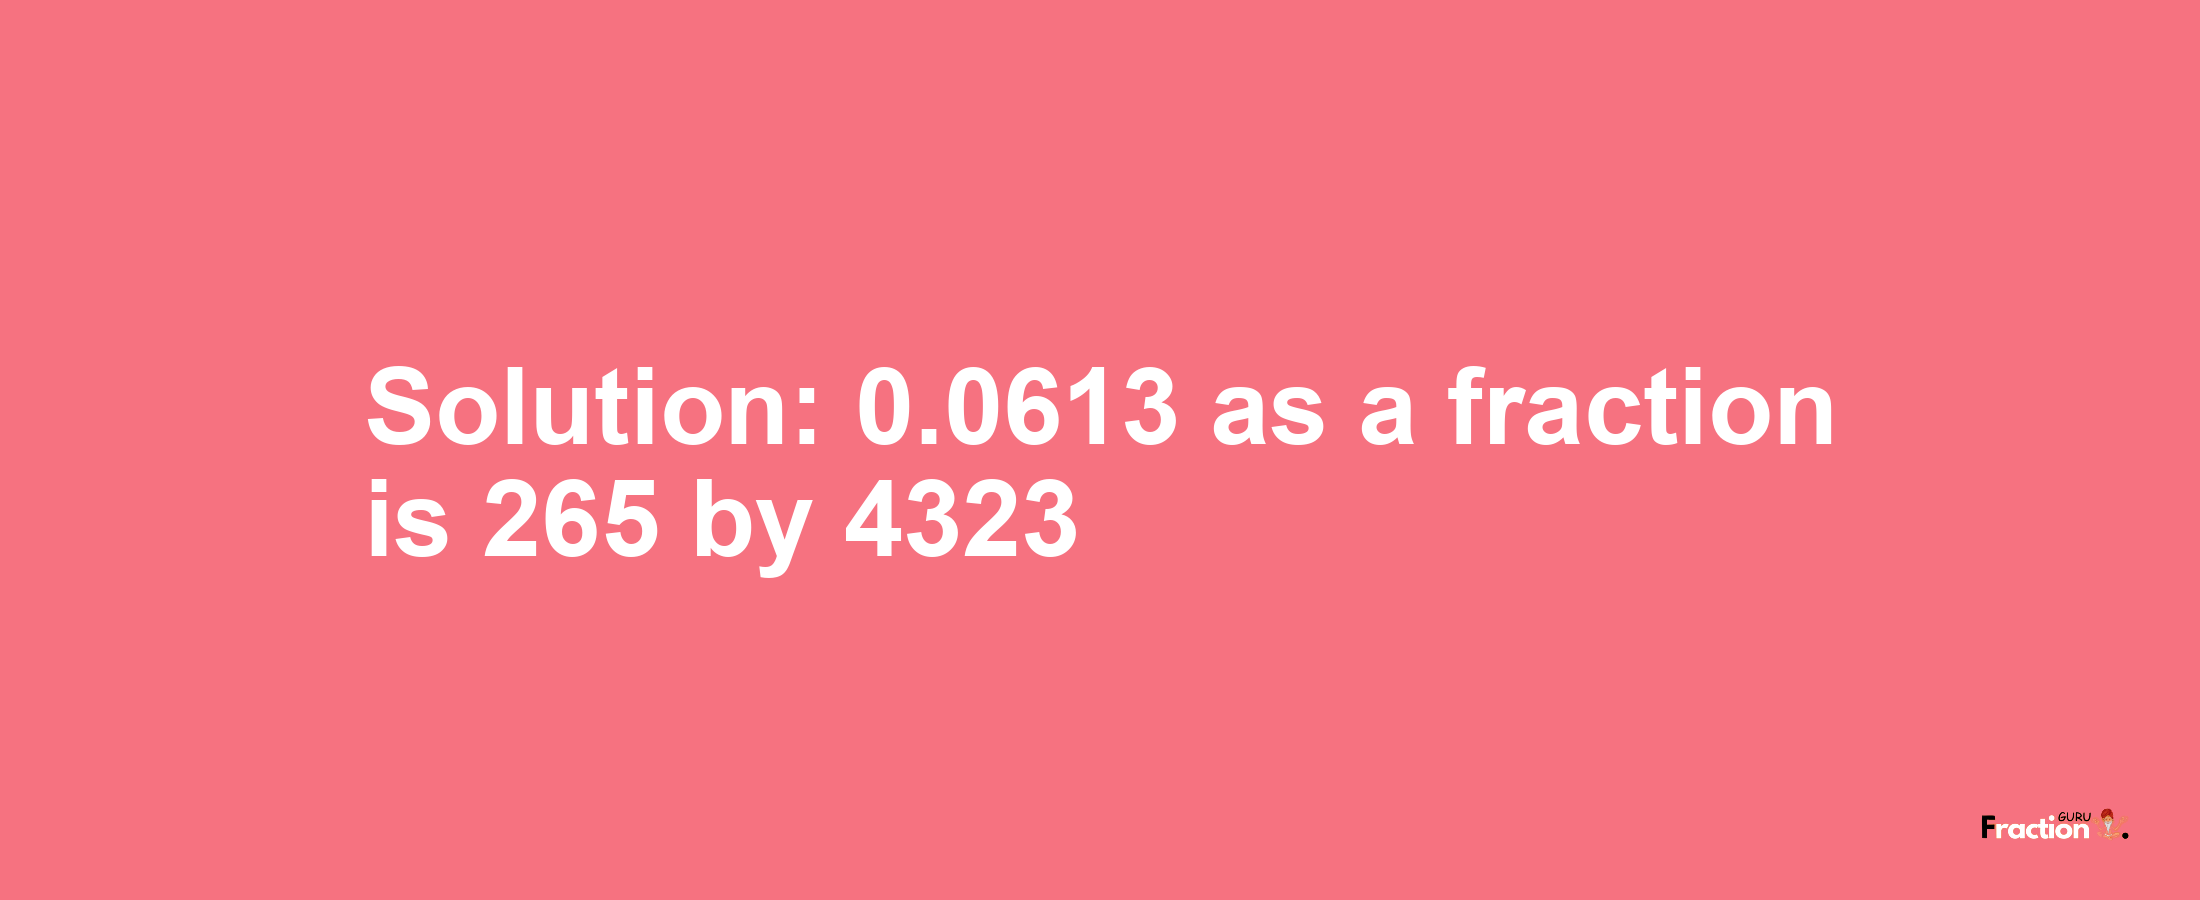 Solution:0.0613 as a fraction is 265/4323